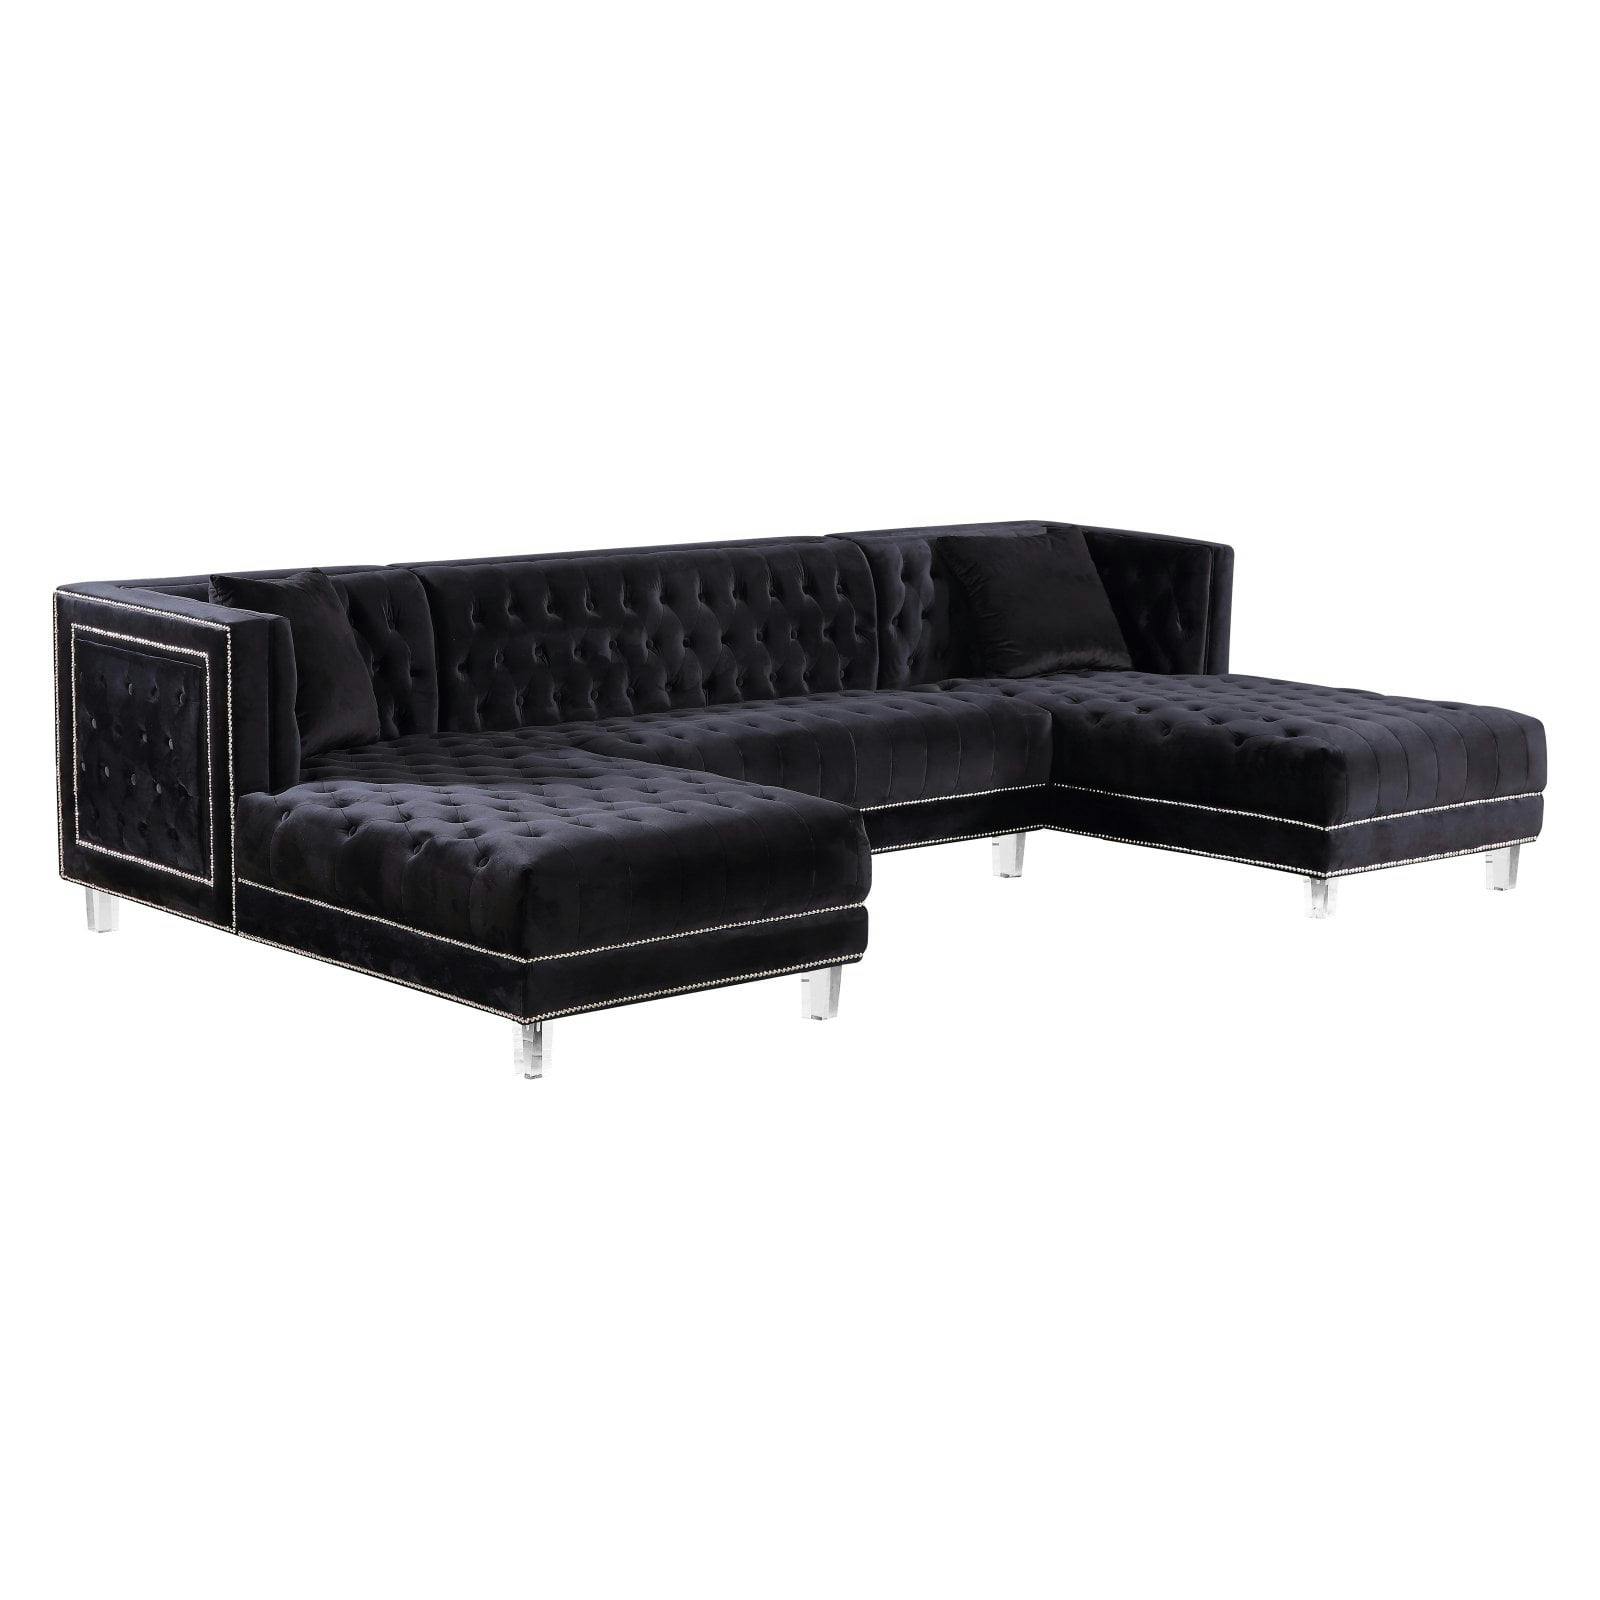 Luxurious Black Velvet Tufted 3-Piece Sectional with Nailhead Accents